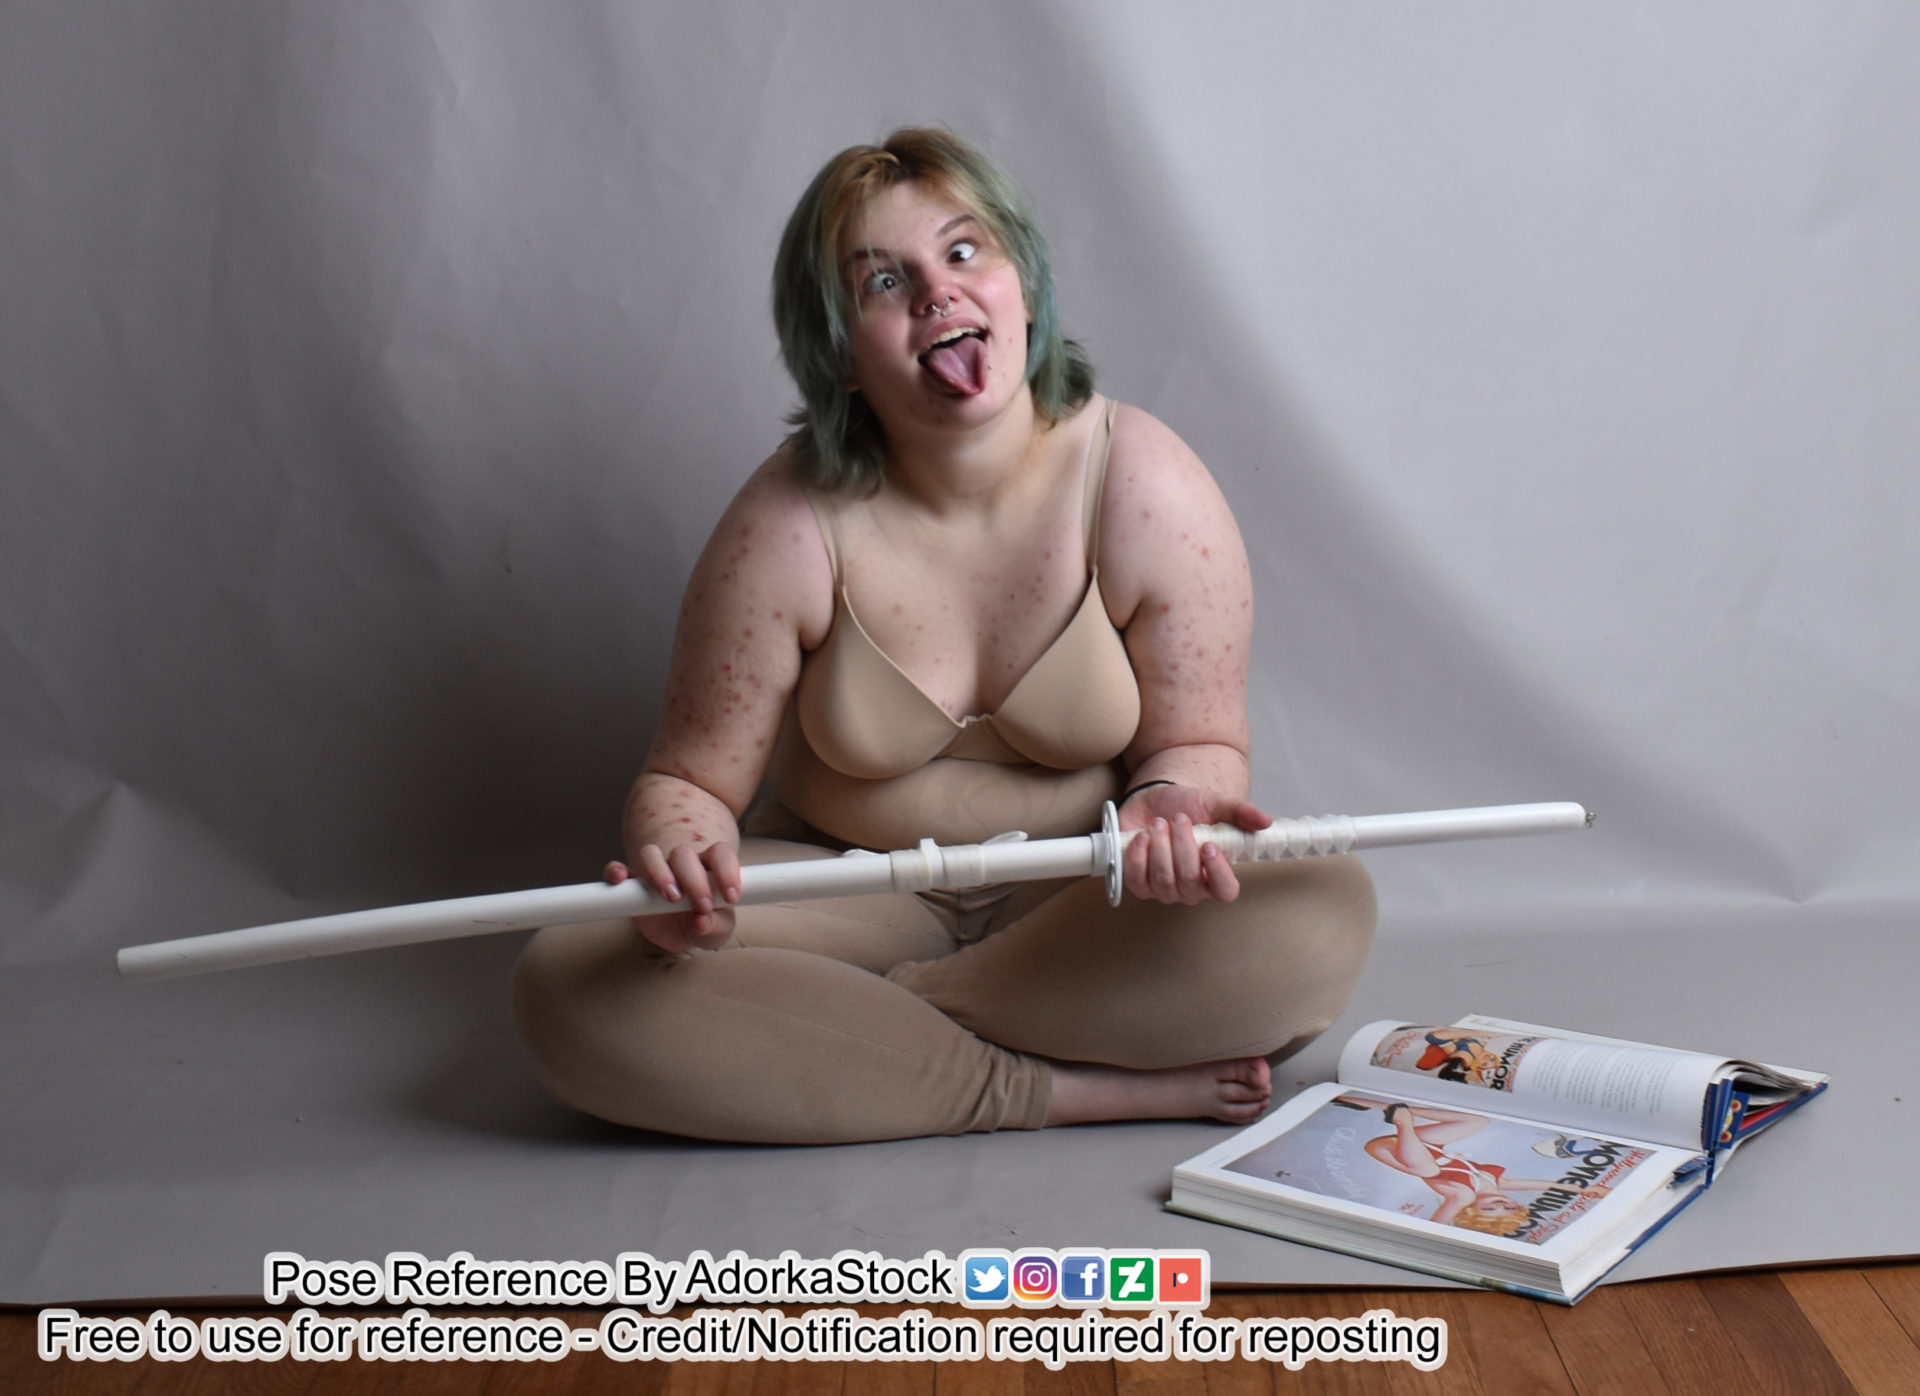 A person in a nude colored top and skinny jeans sitting crosslegged with a white handled katana across their knees and in their hands. The person has their eyes crossed and tongue sticking out. There is a blue book on the right with pictures of pinup girls in it